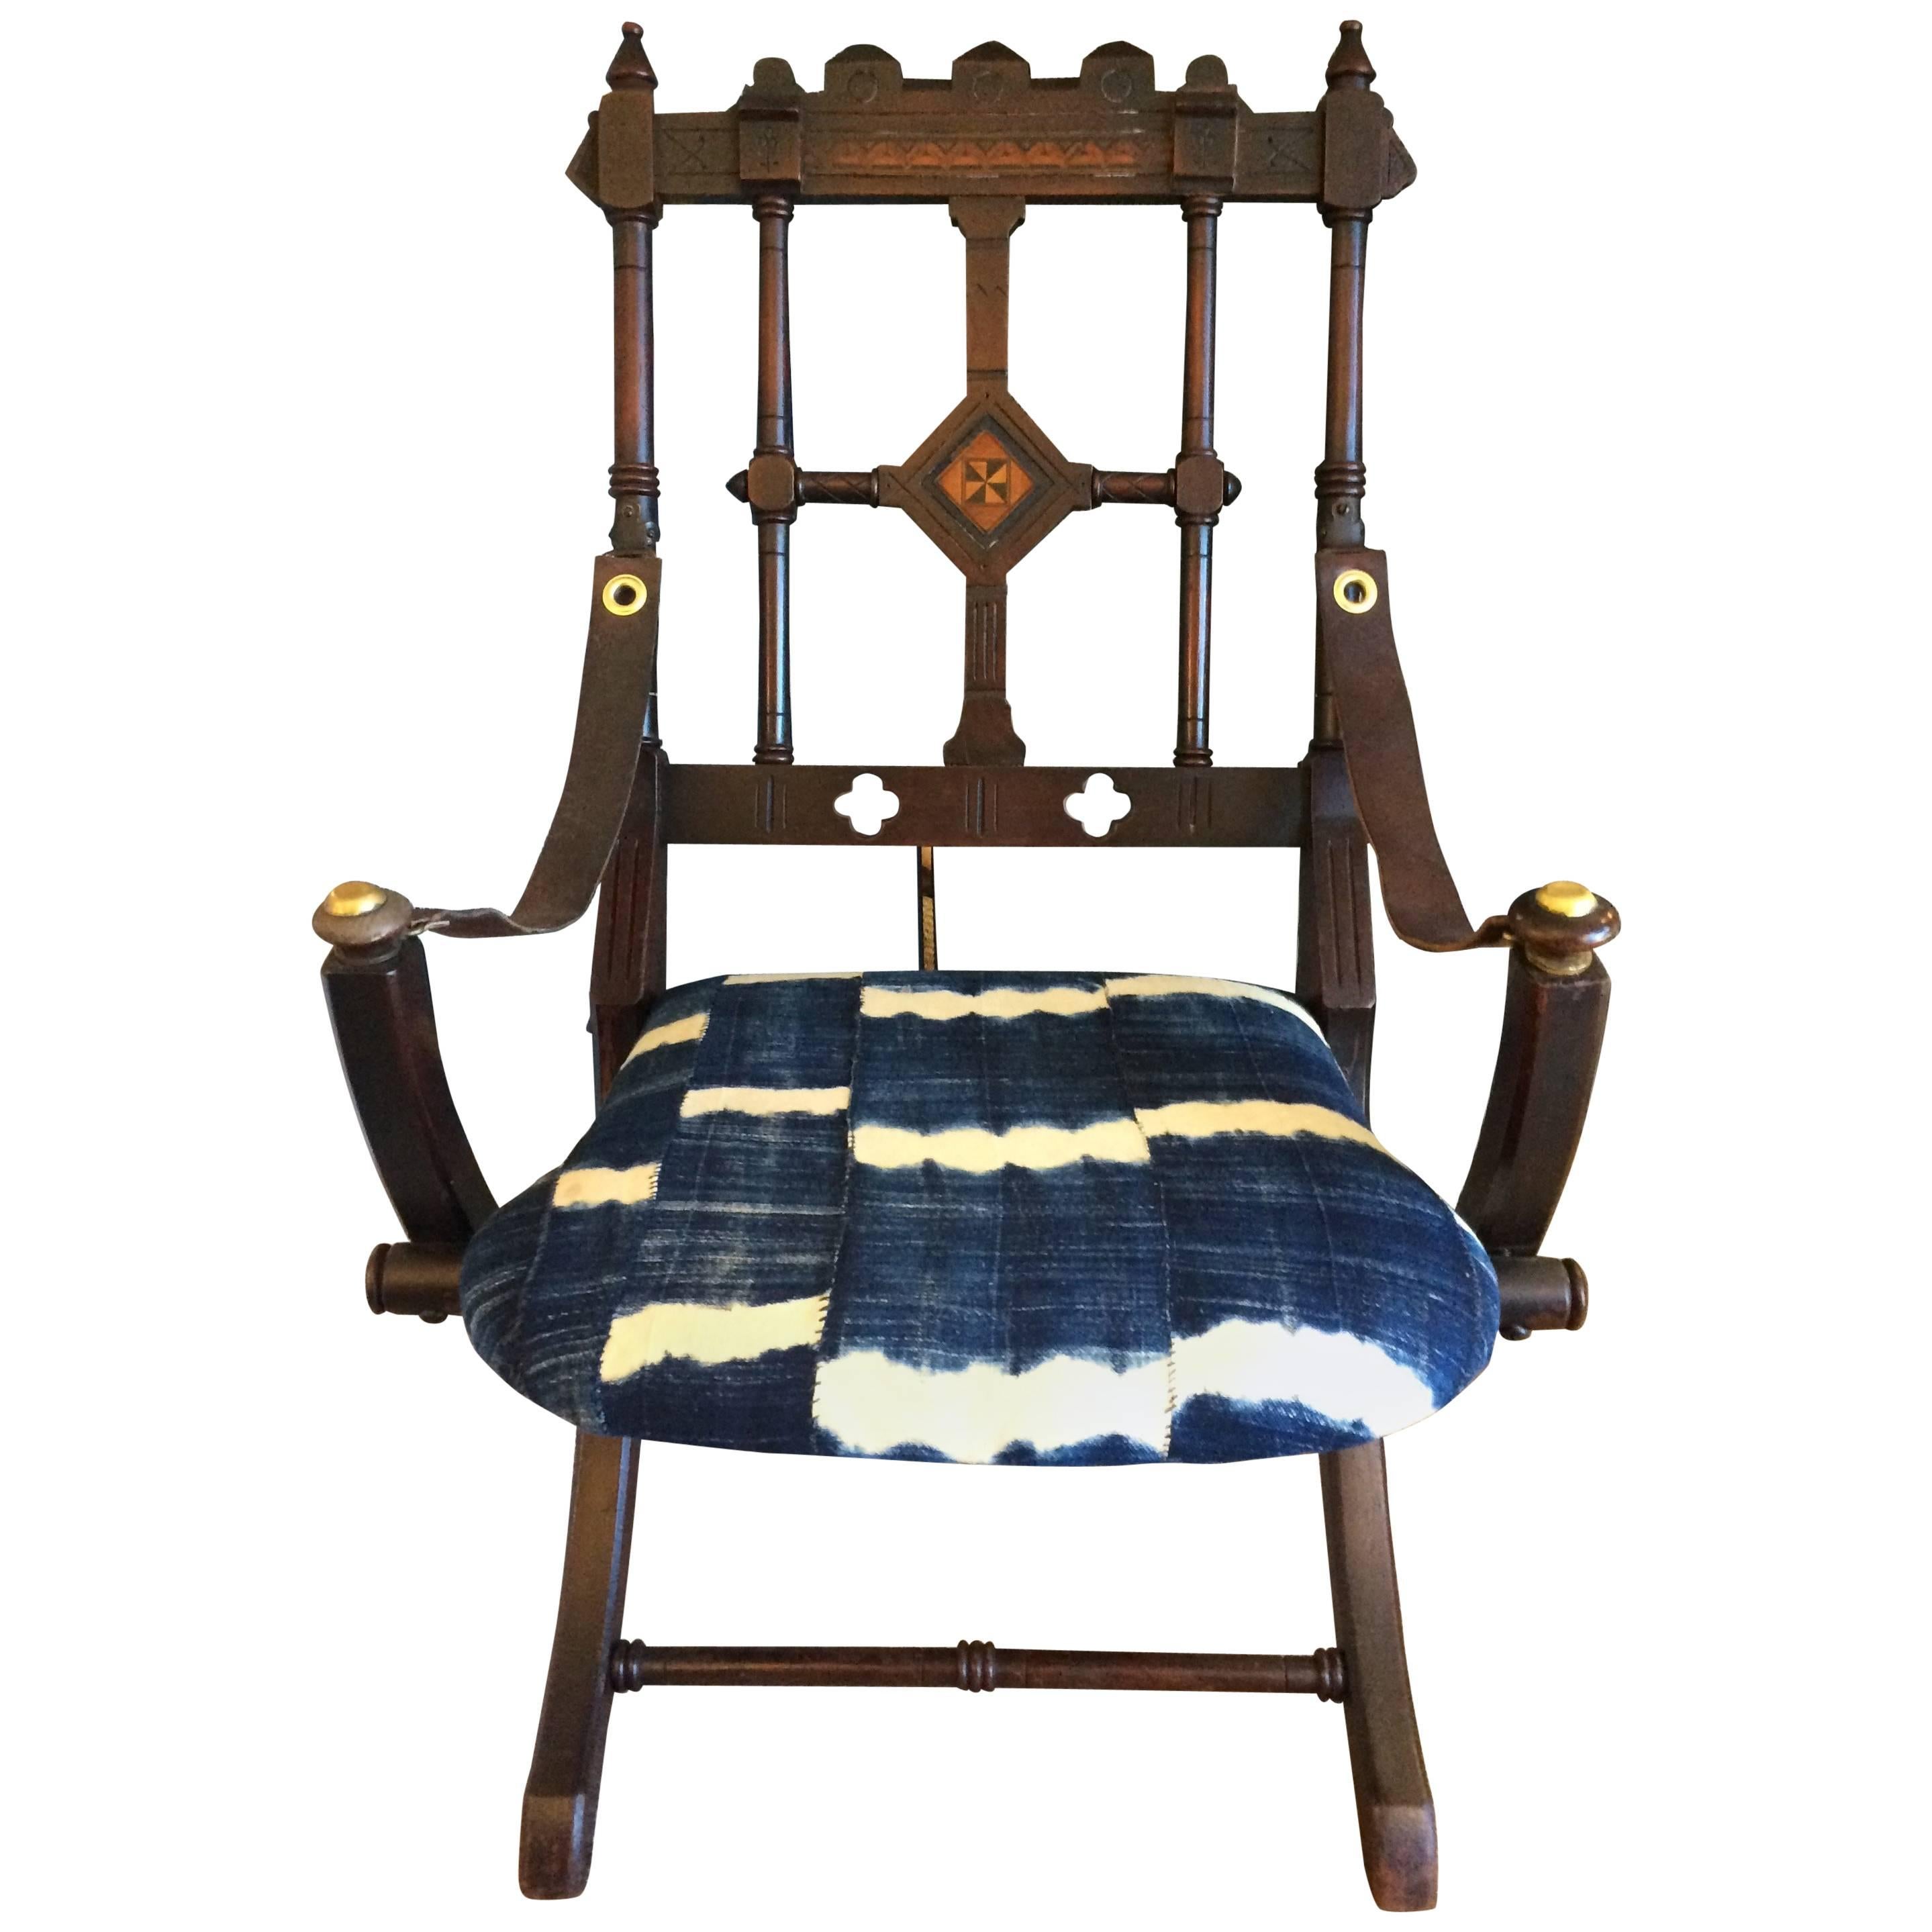 Rare 19th Century Eastlake Campaign Style Folding Chair